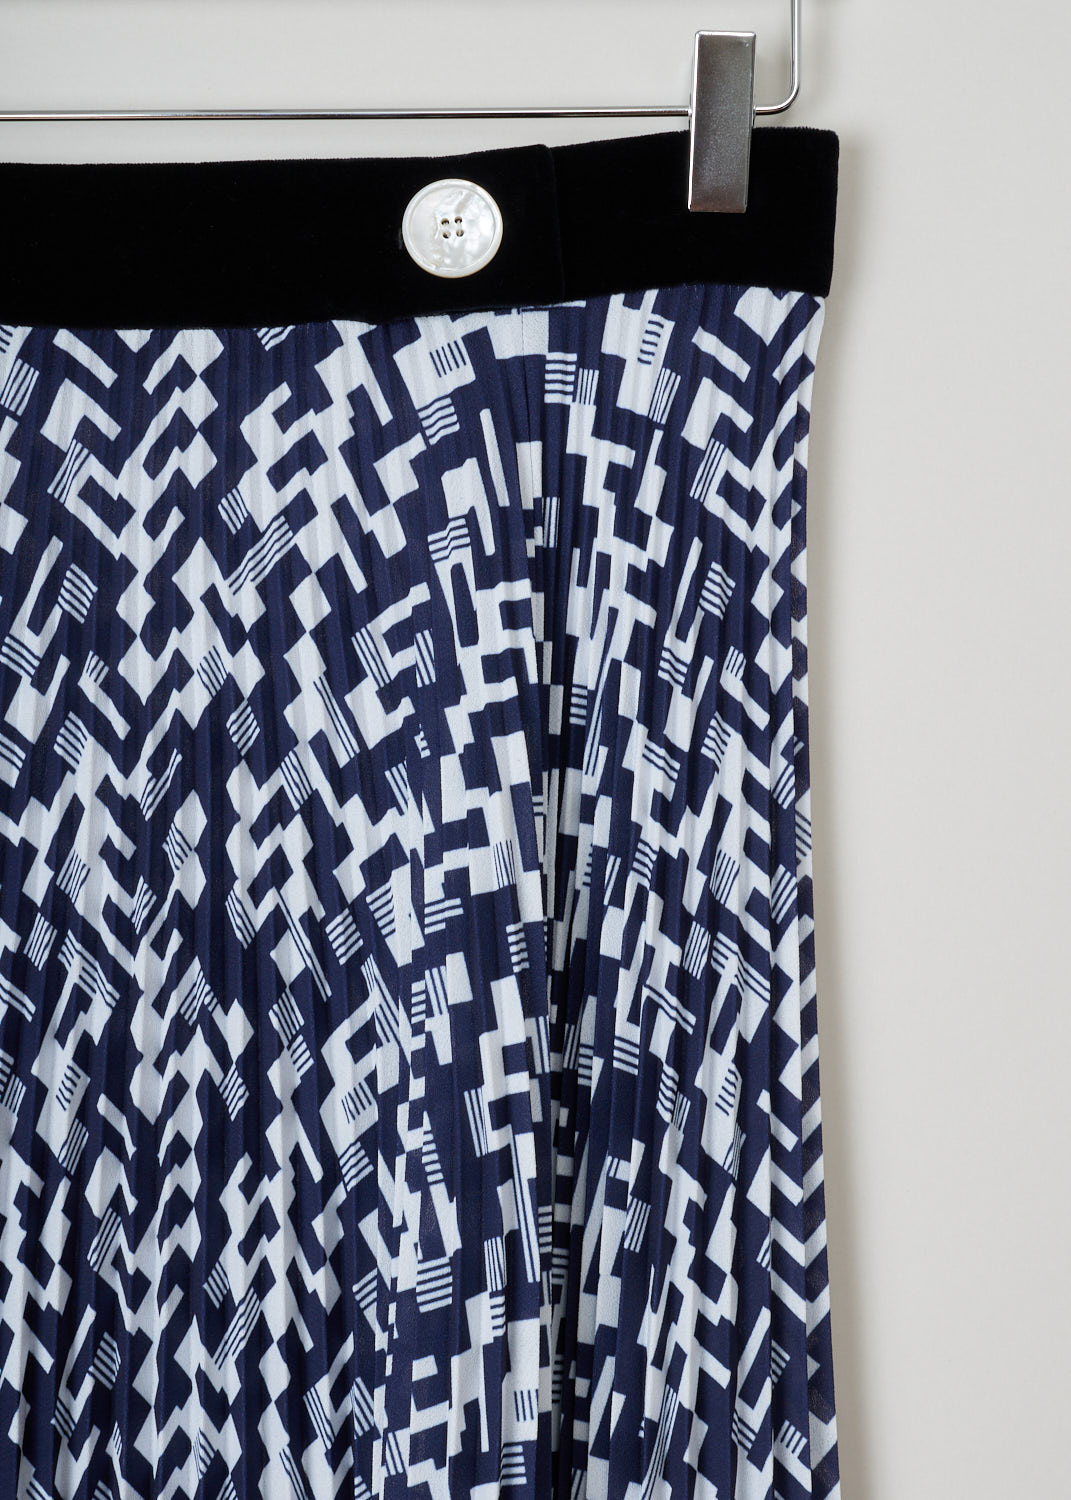 Prada, Geometric print skirt in blue and white, sable_leg_patte_P135R_F0216_baltico, blue, white, detail, Geometric design with contrasting colors, which makes the print come to life. Featuring an accordion pleat model, and a waistband made from black velvet material with two ivory colored buttons. There is a concealed zipper on the back for fastening. 